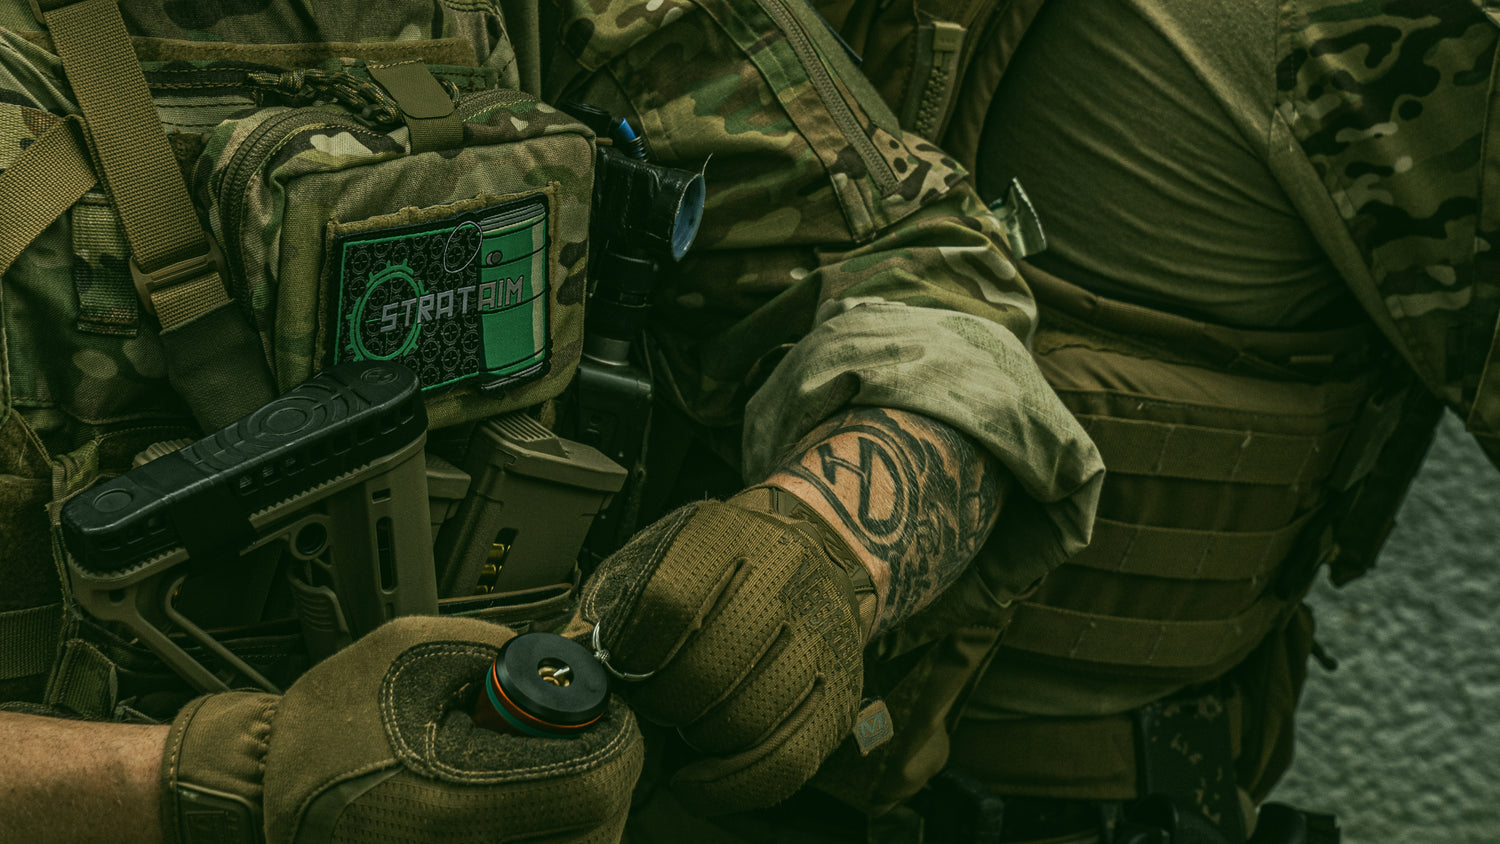 The Role of Training BB Grenades in Professional Training Scenarios